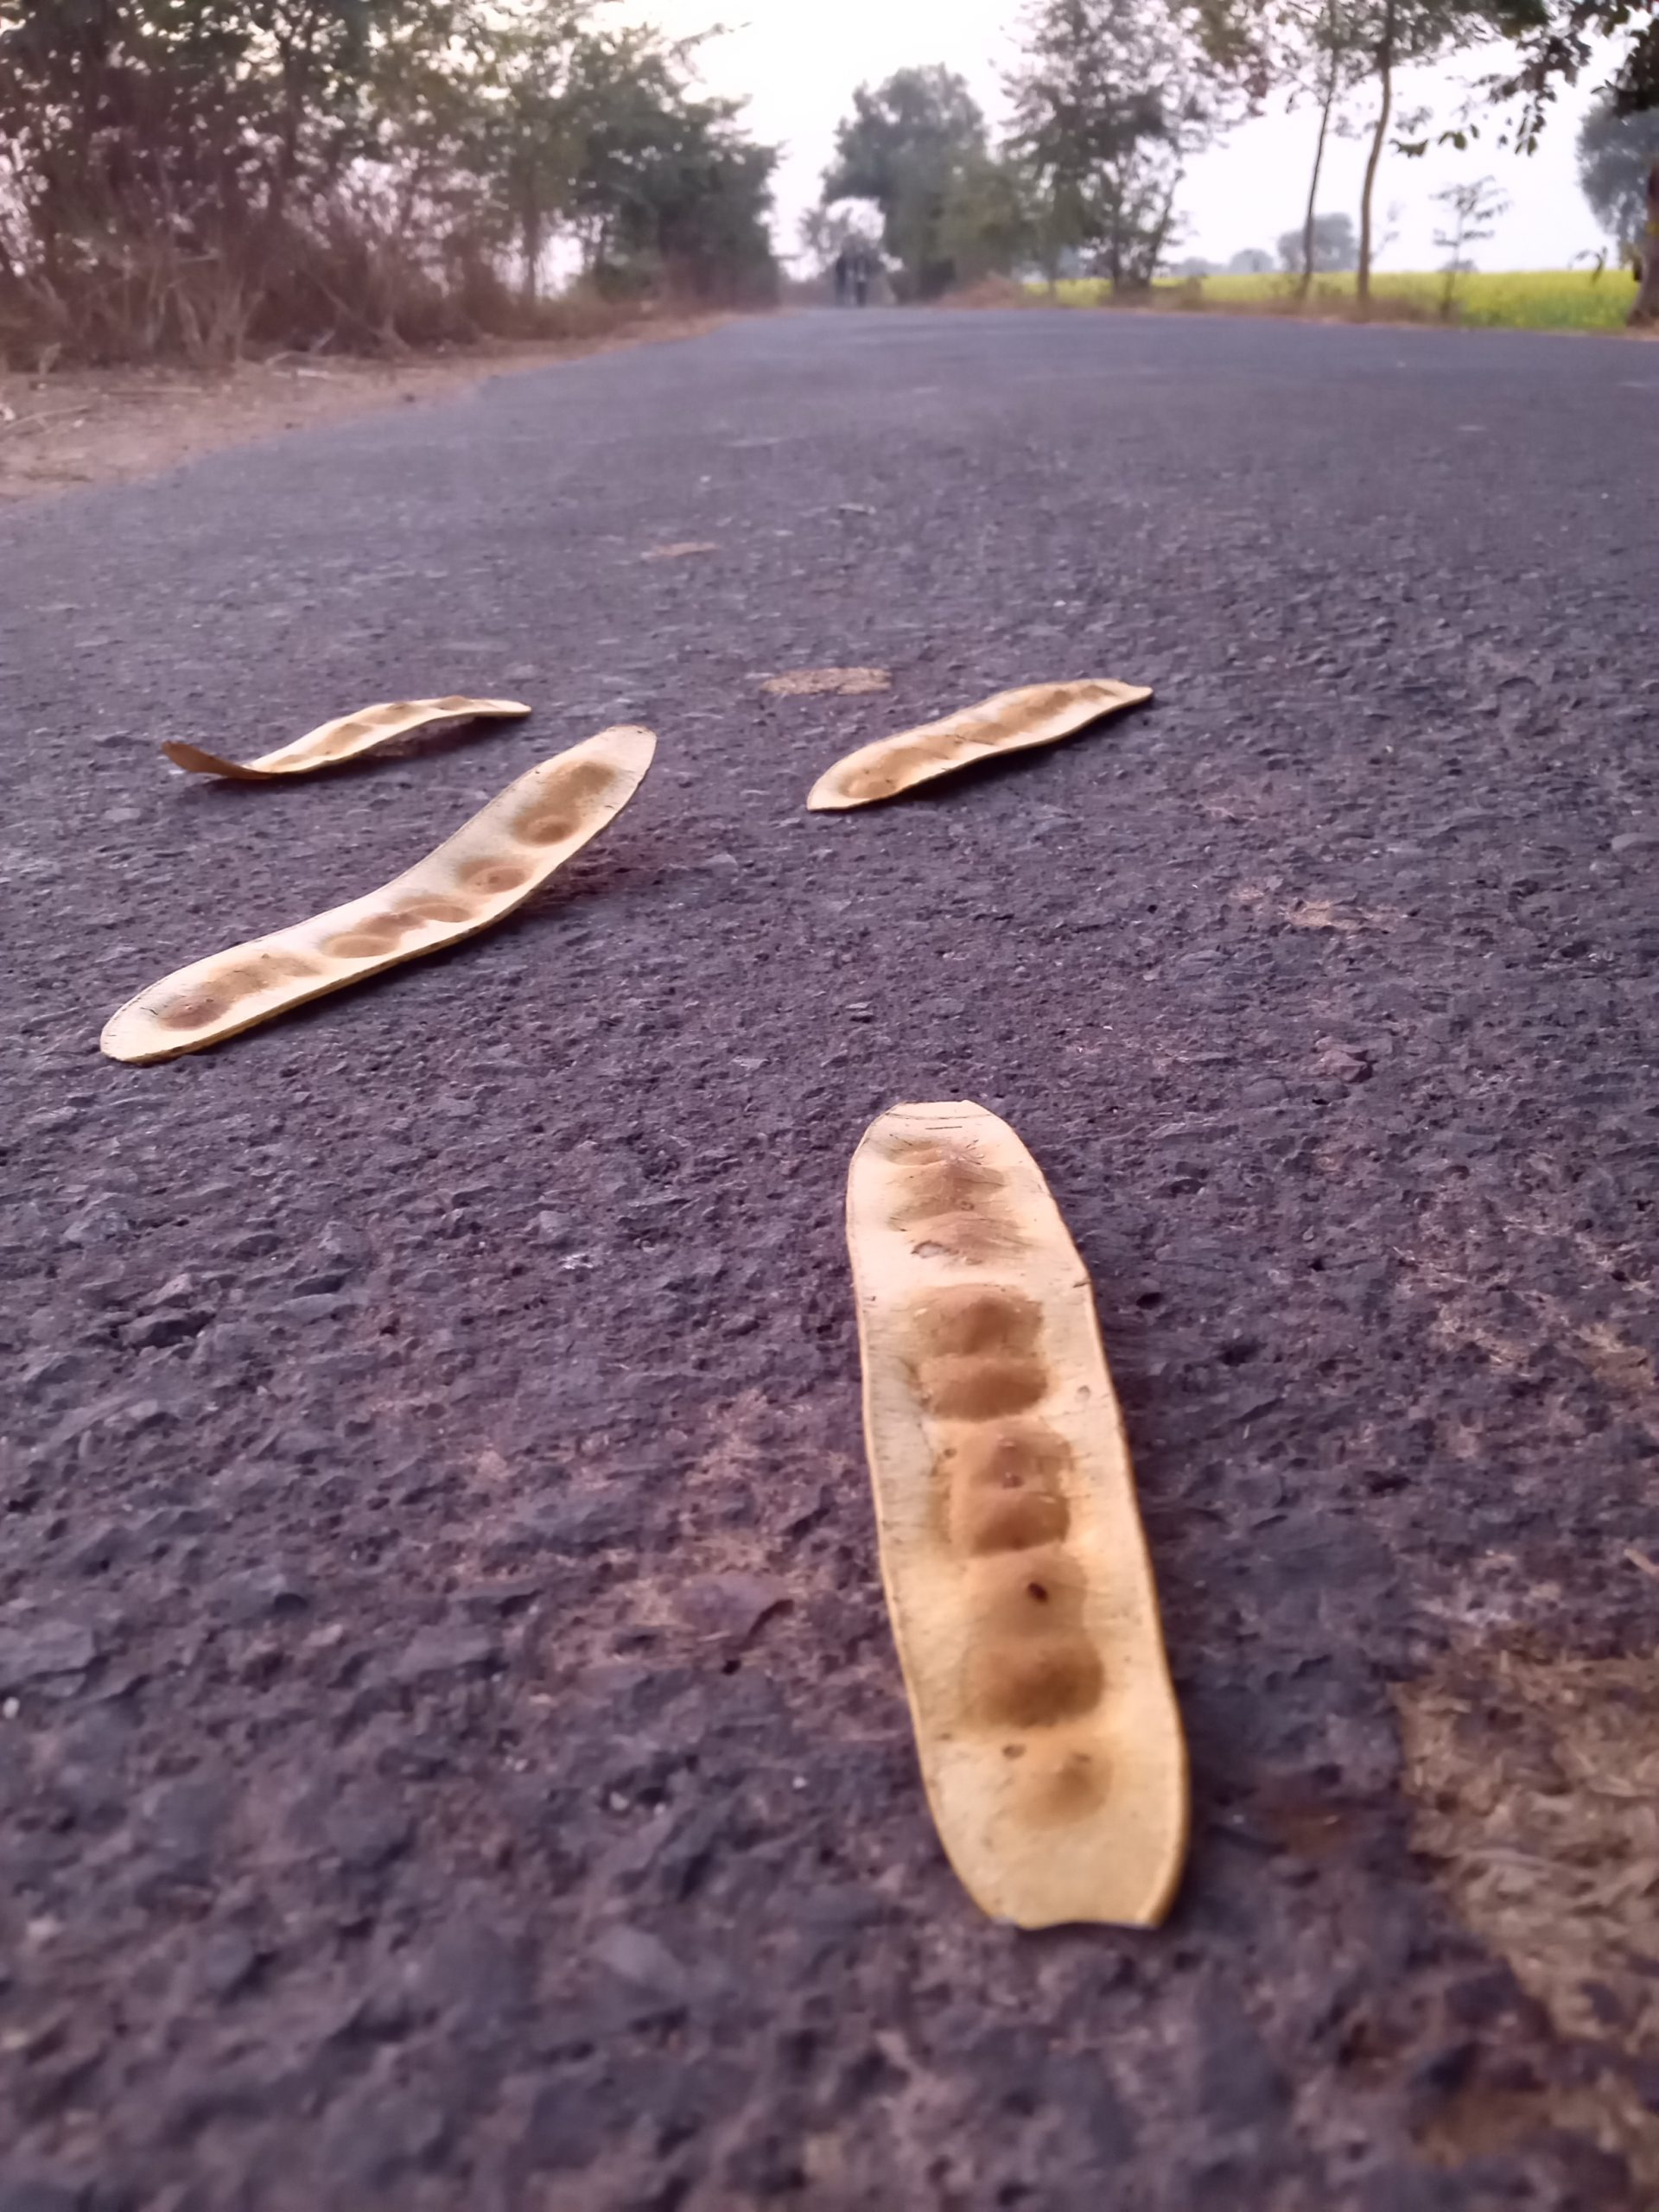 Dried leaves fallen on the road